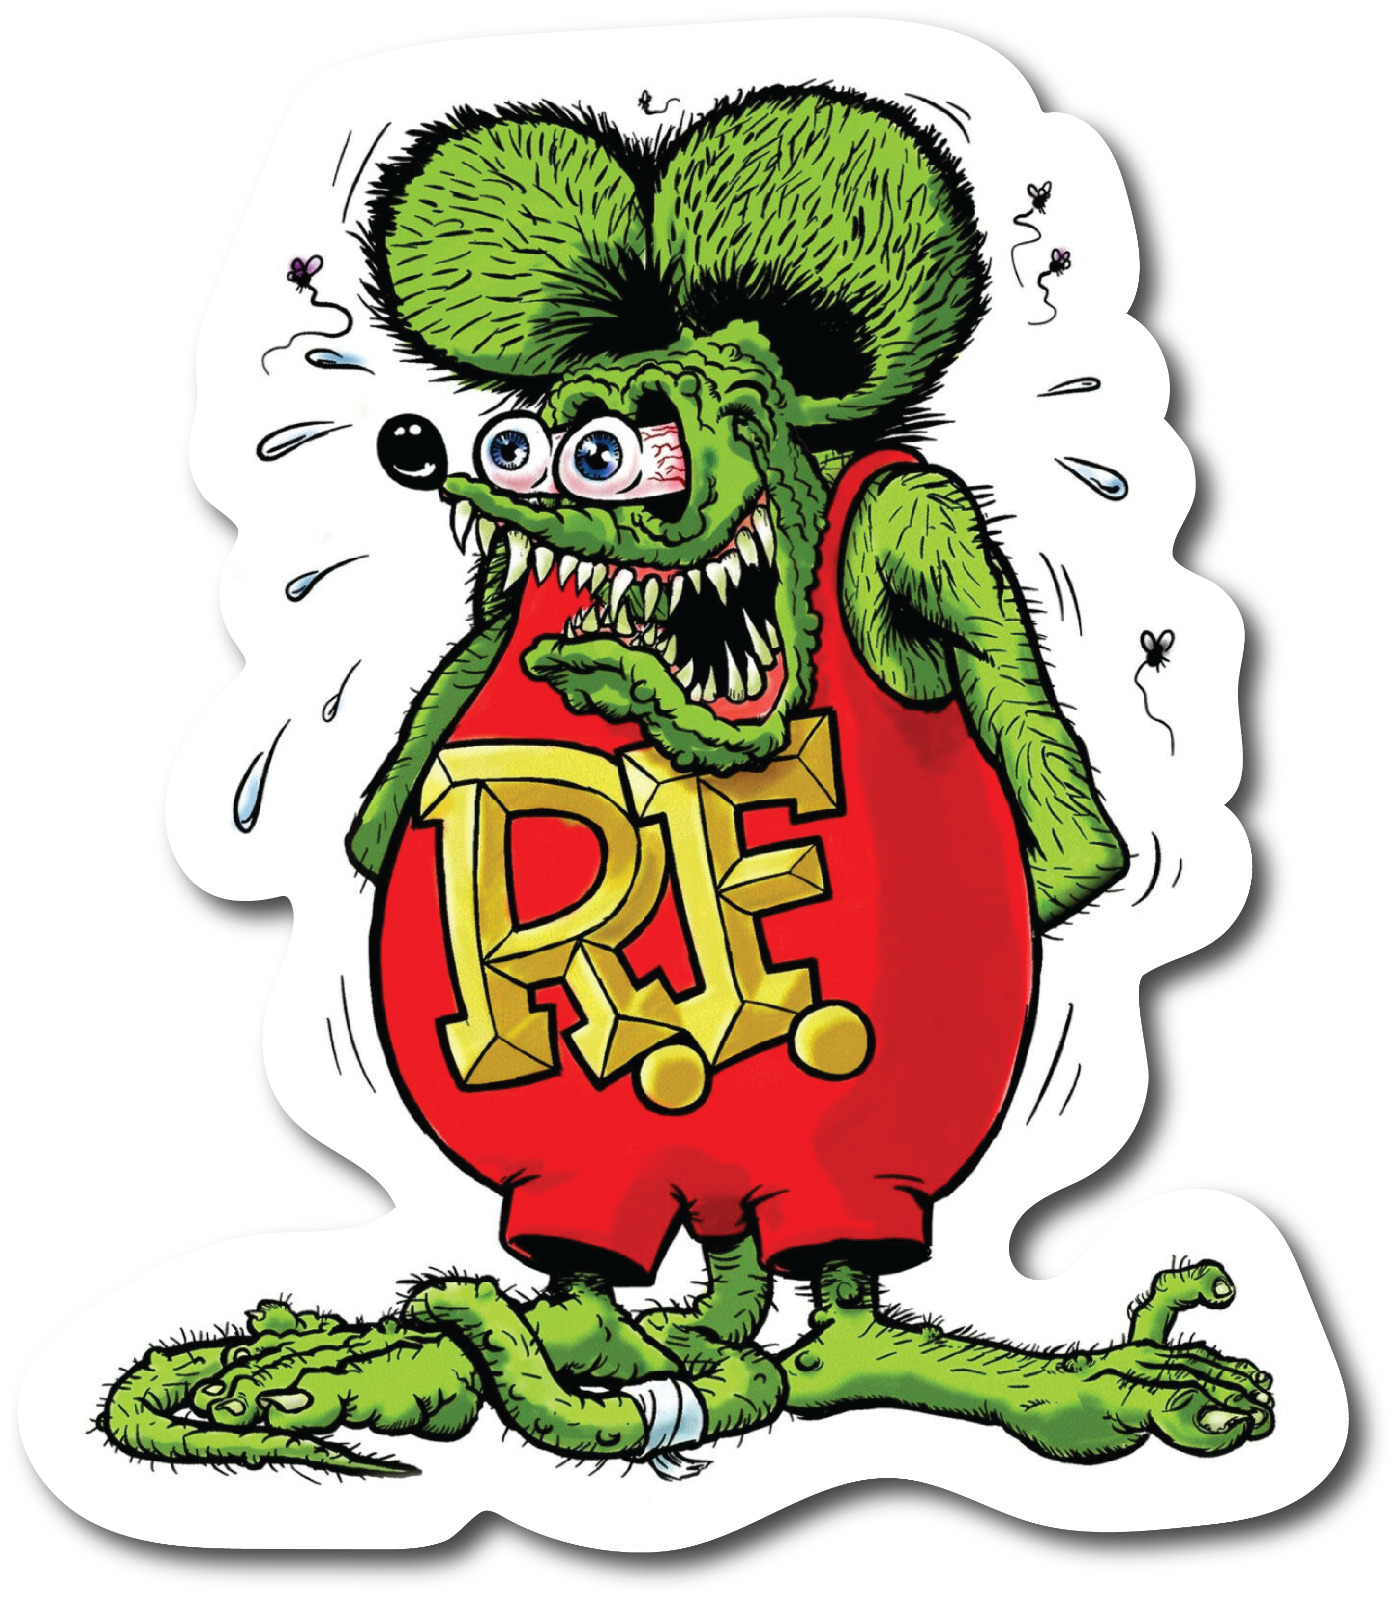 2-PACK RAT FINK GLOSSY STICKER DECAL HOT ROD CHEVY MODEL A ROADSTER HIGH GLOSS